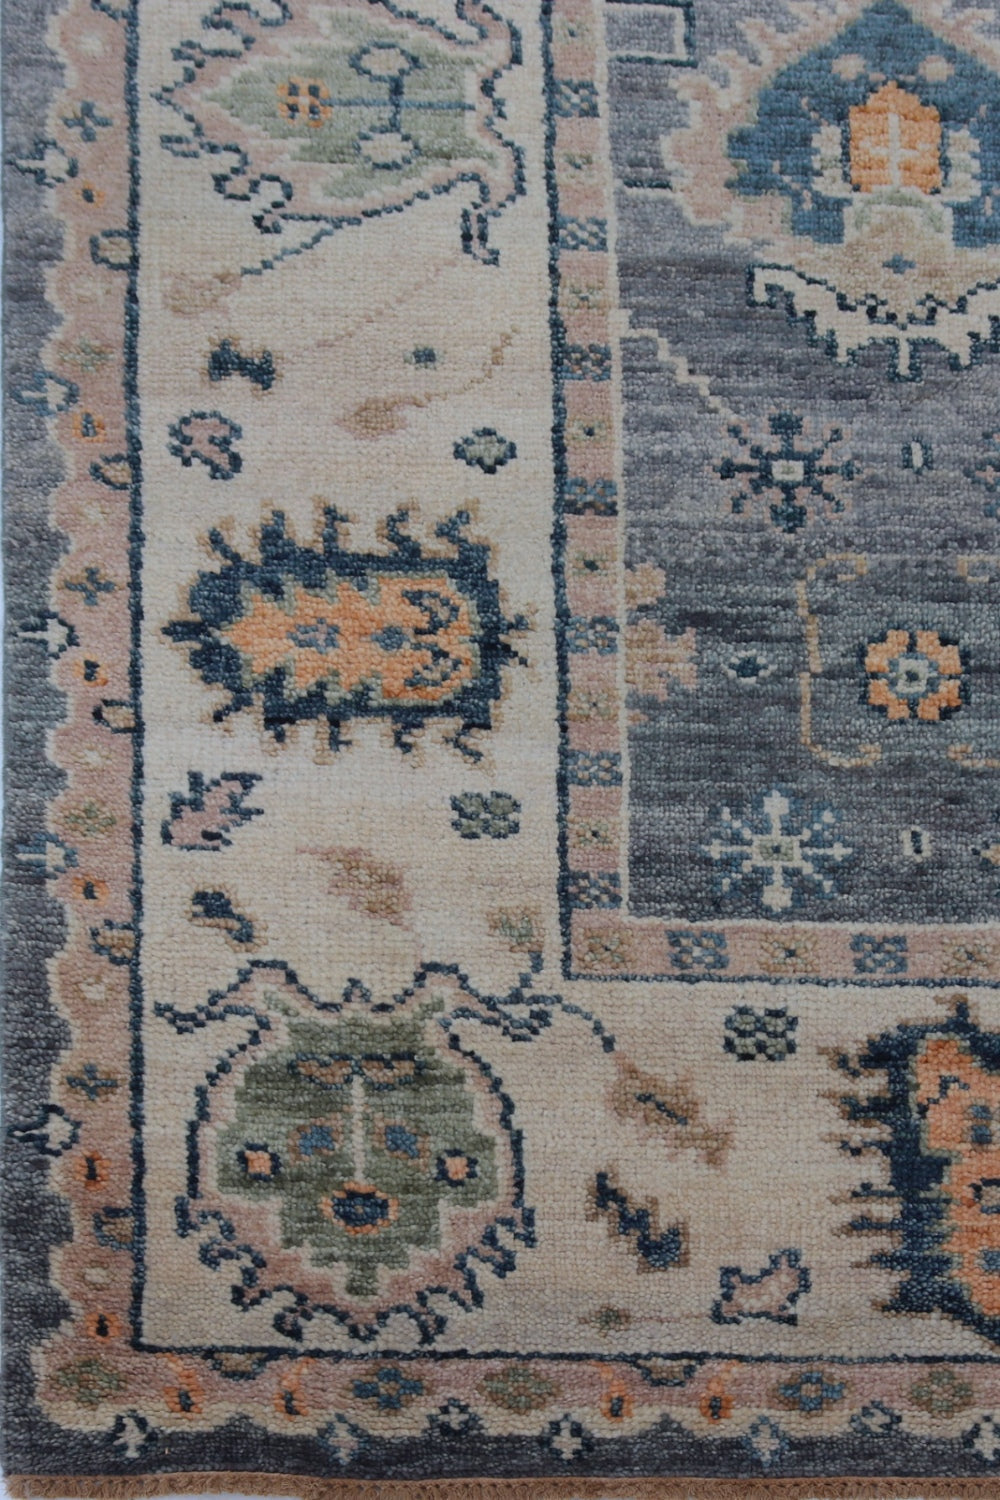 Sultanabad 5 Handwoven Traditional Rug, J71668